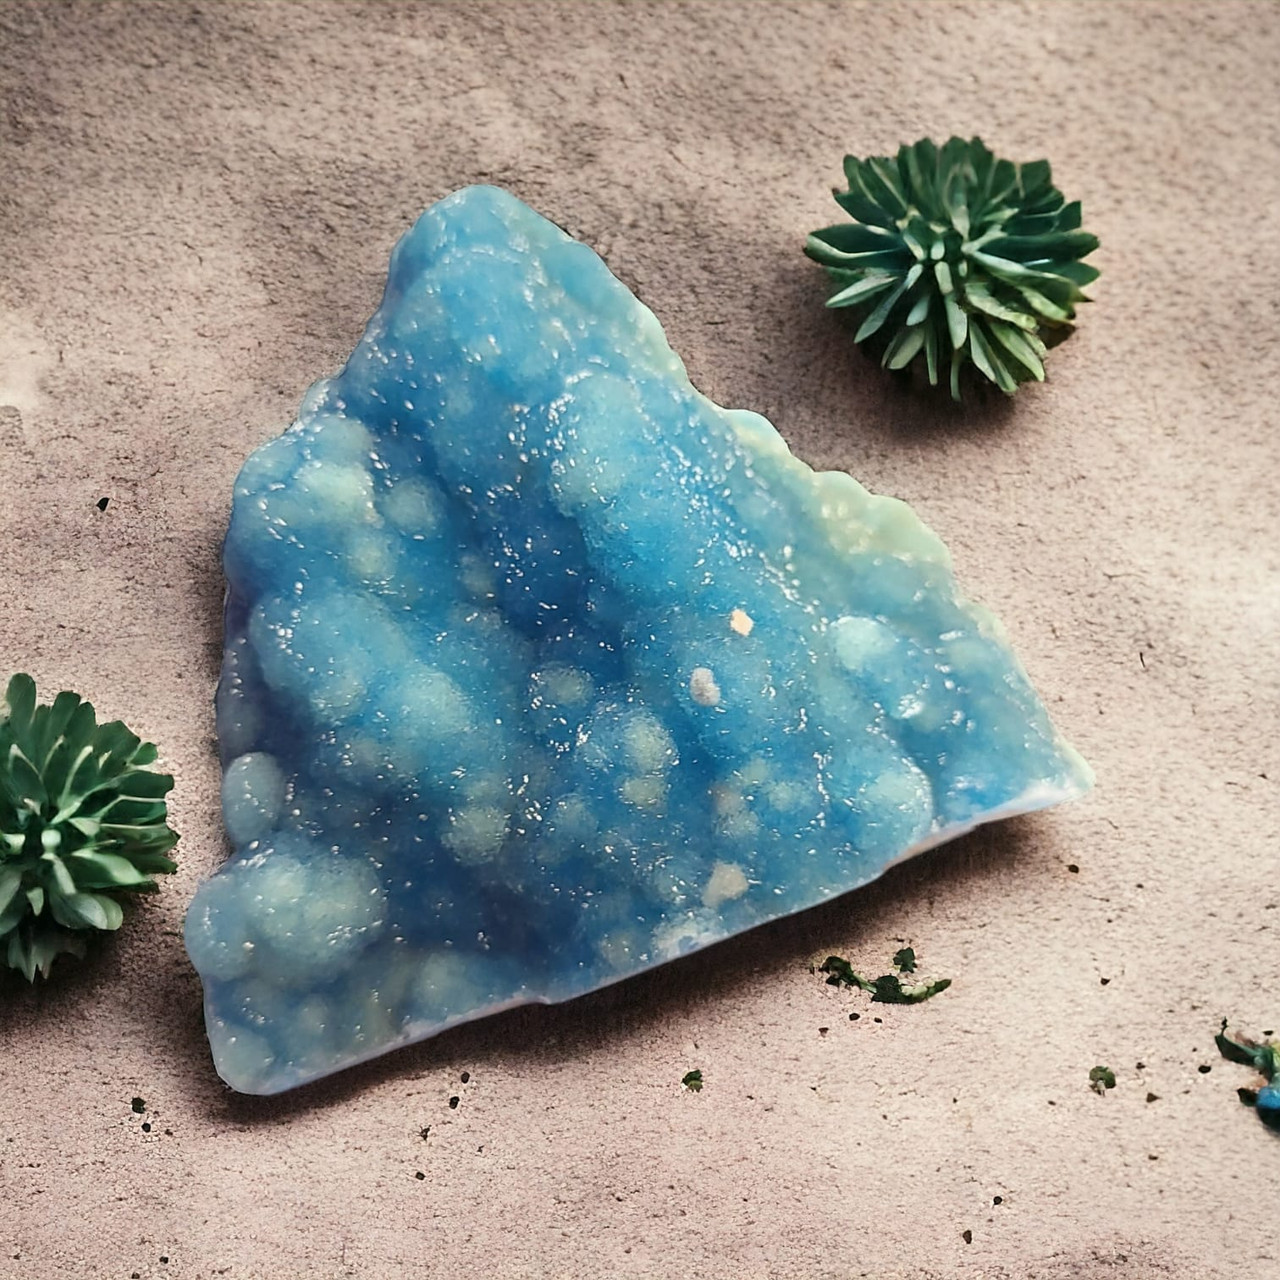 Explore the captivating world of Blue Hemimorphite with Gaea Rare. This mineral, scientifically identified as a zinc silicate with a stunning blue hue from copper impurities, showcases intricate crystal formations. Mined for quality, Gaea Rare's Blue Hemimorphite combines scientific fascination with metaphysical significance.